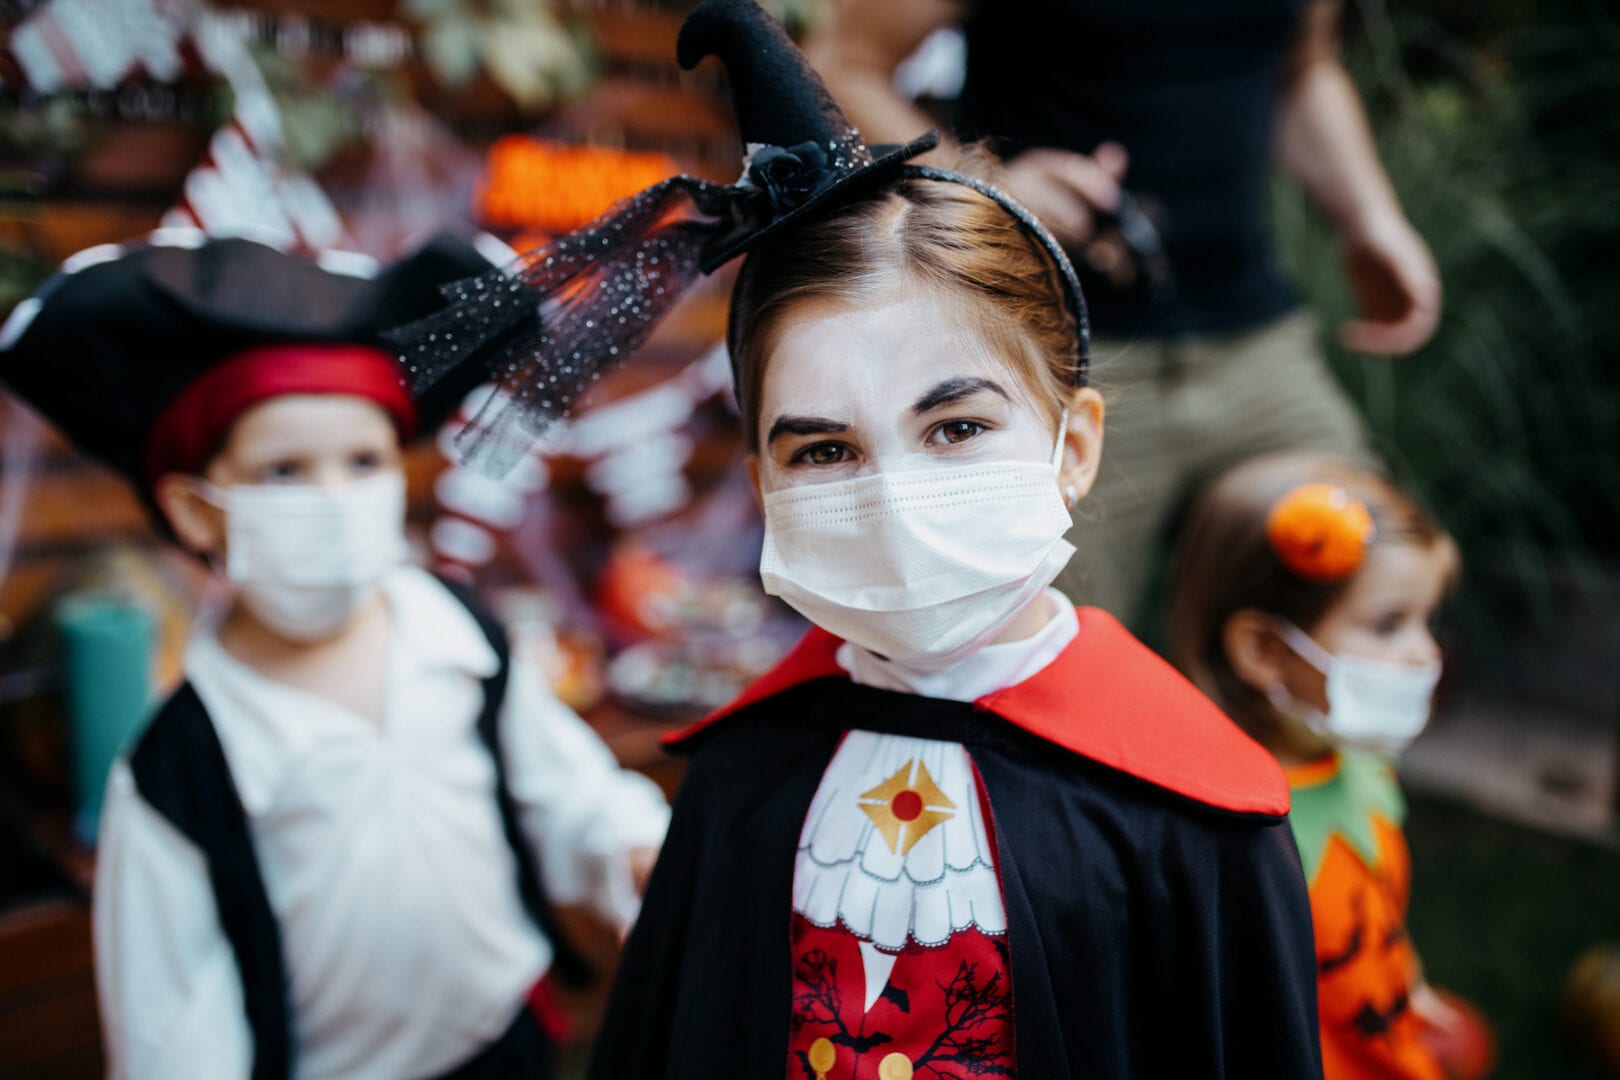 Halloween safety 2021: What parents should know before trick-or-treating